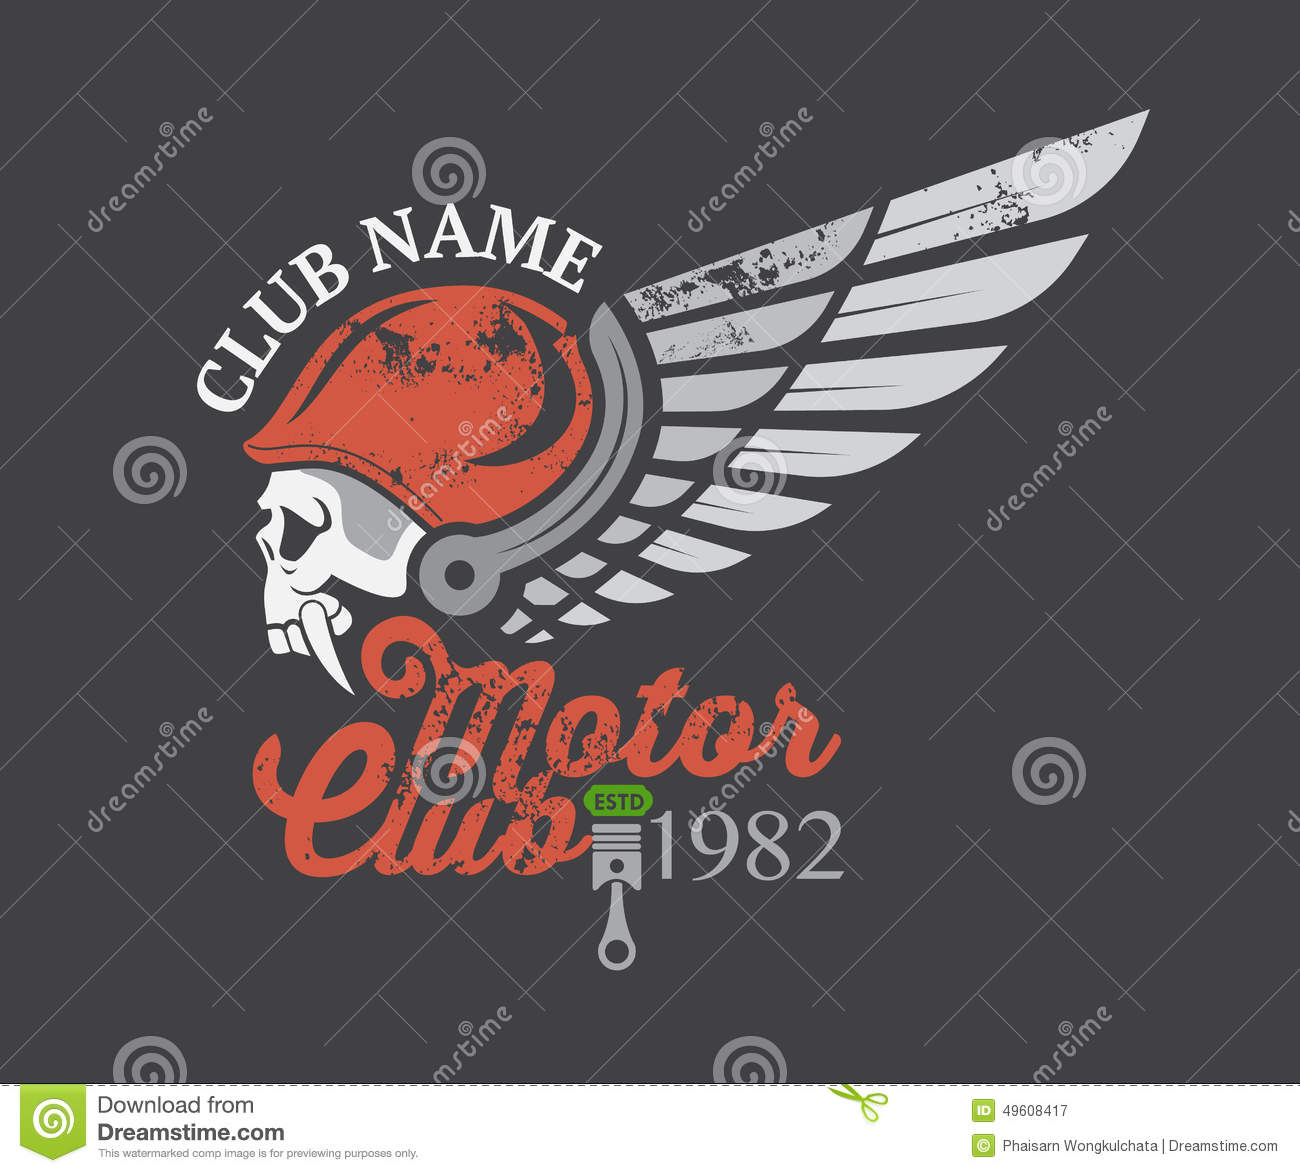 Motor Skull Sticker And Club And Label Stock Vector   Image  49608417